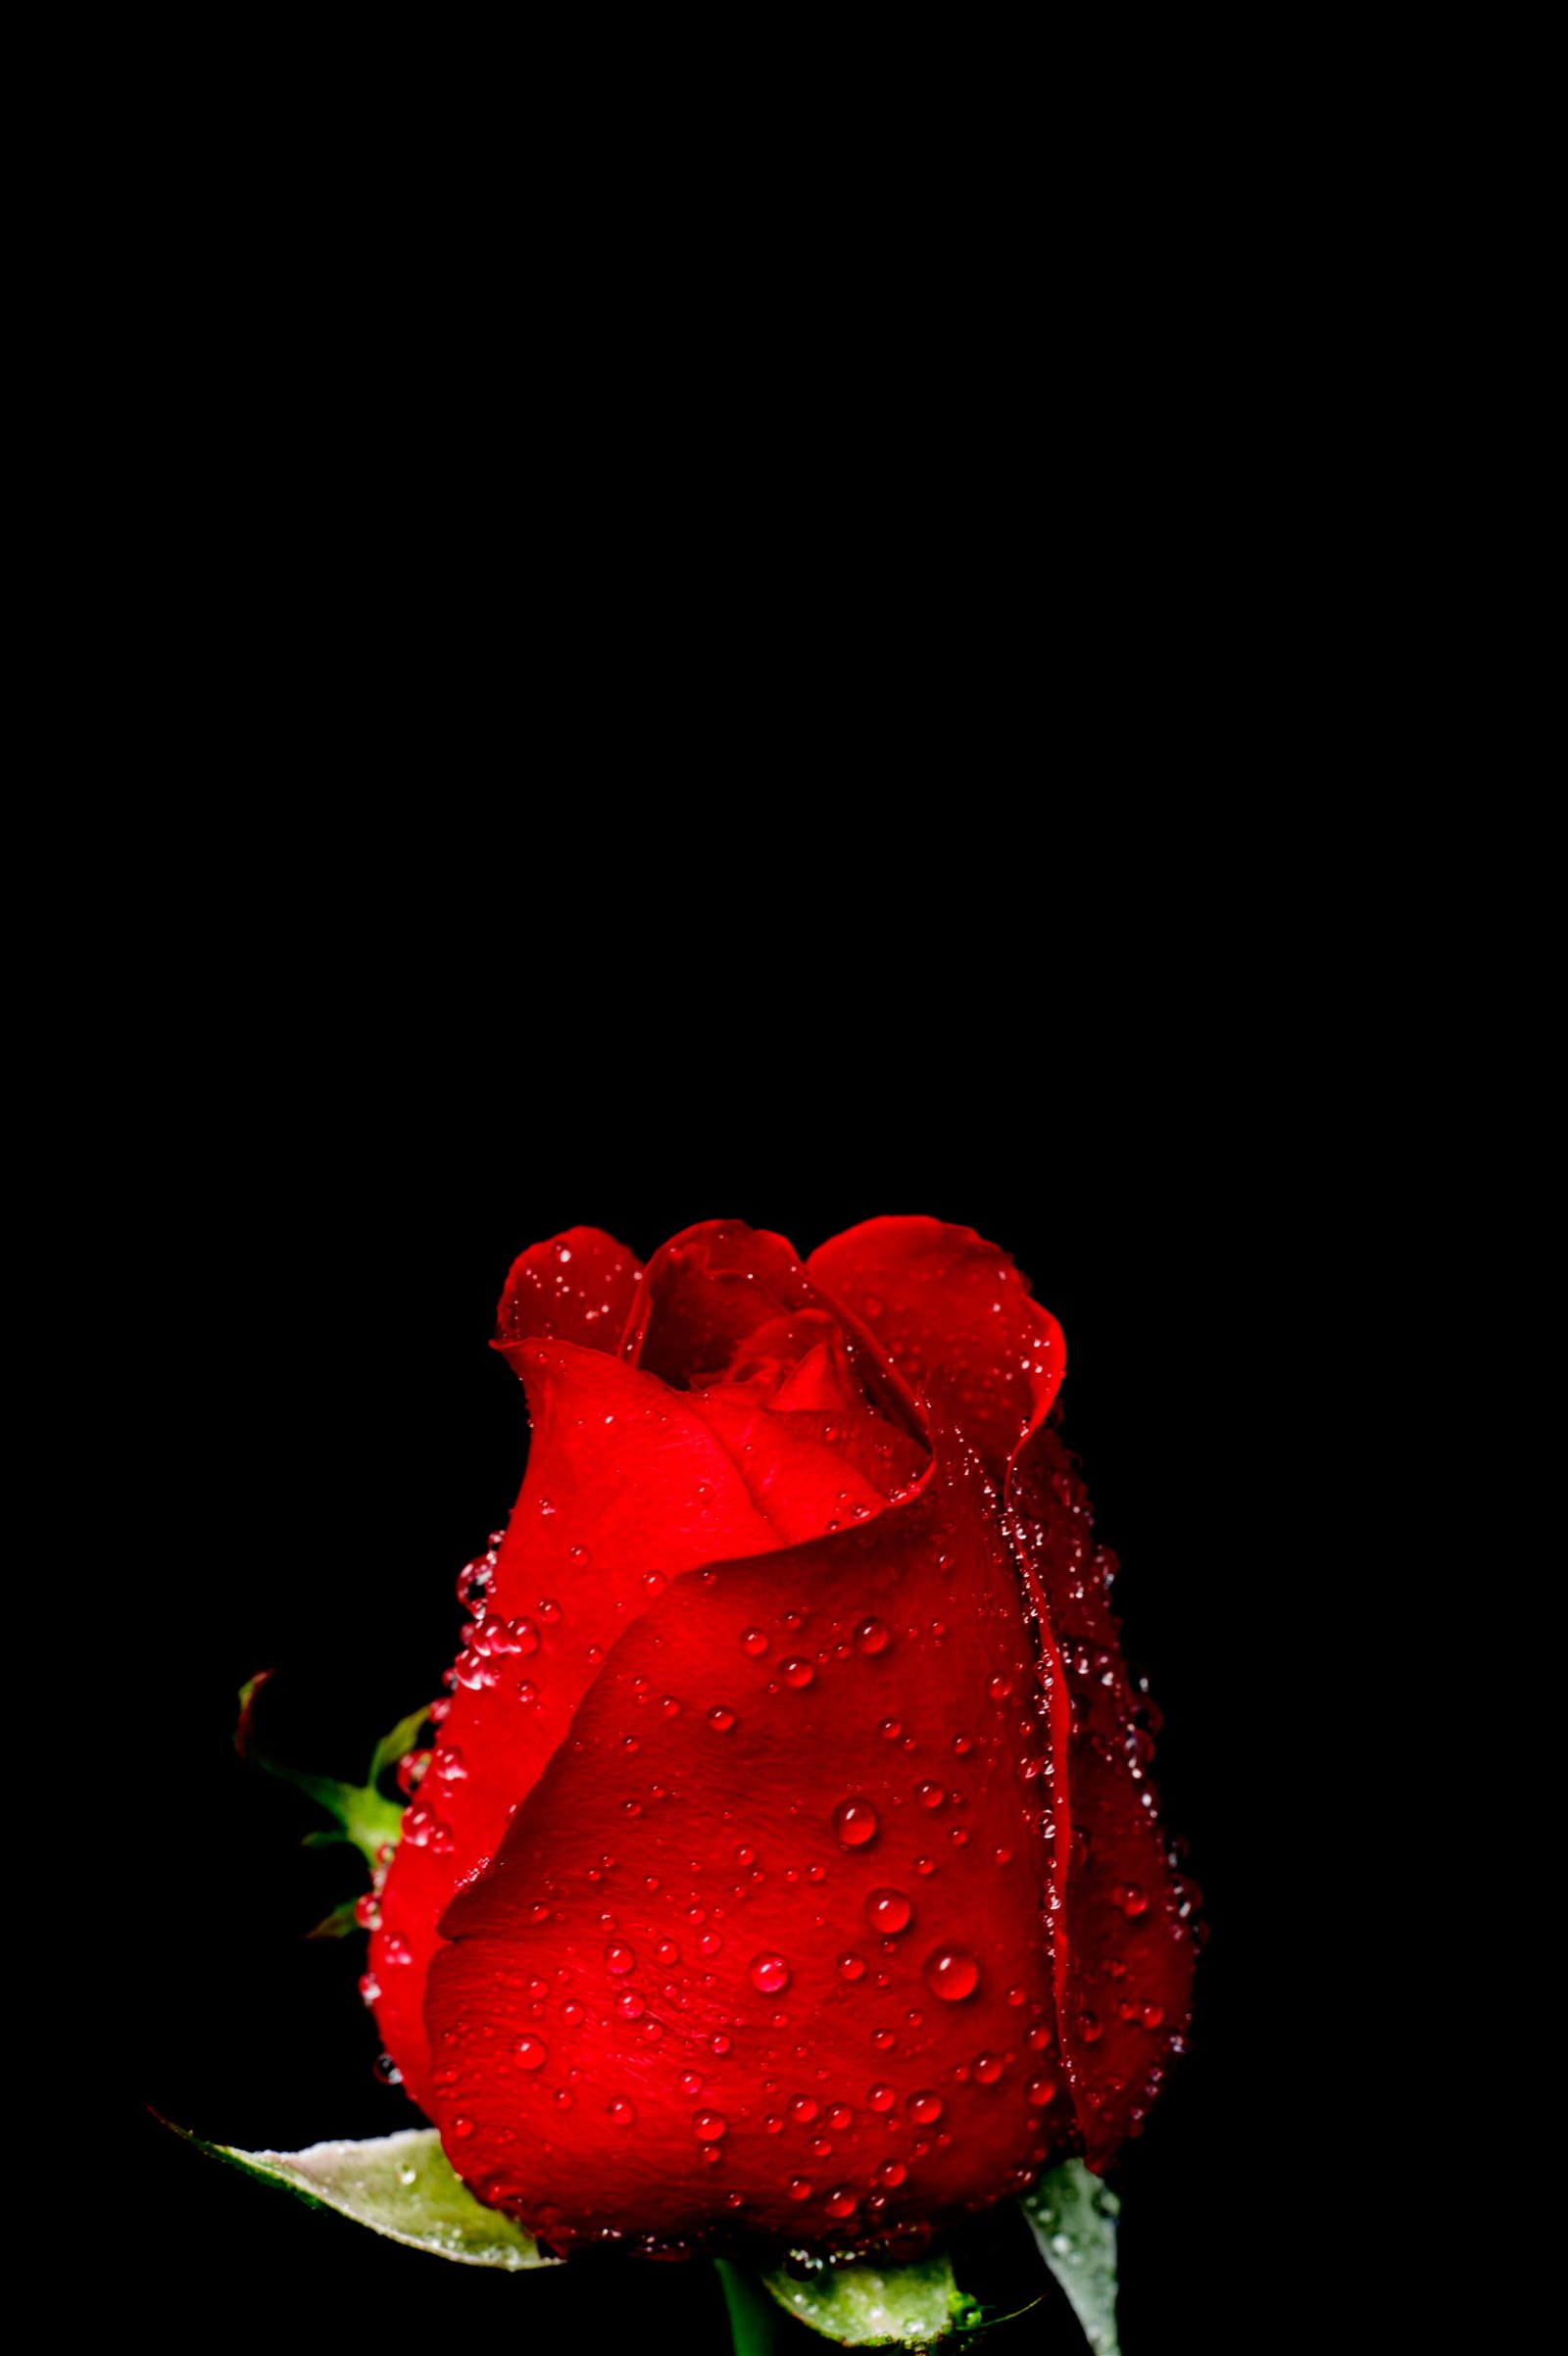 single red rose in negative space photography illustration.